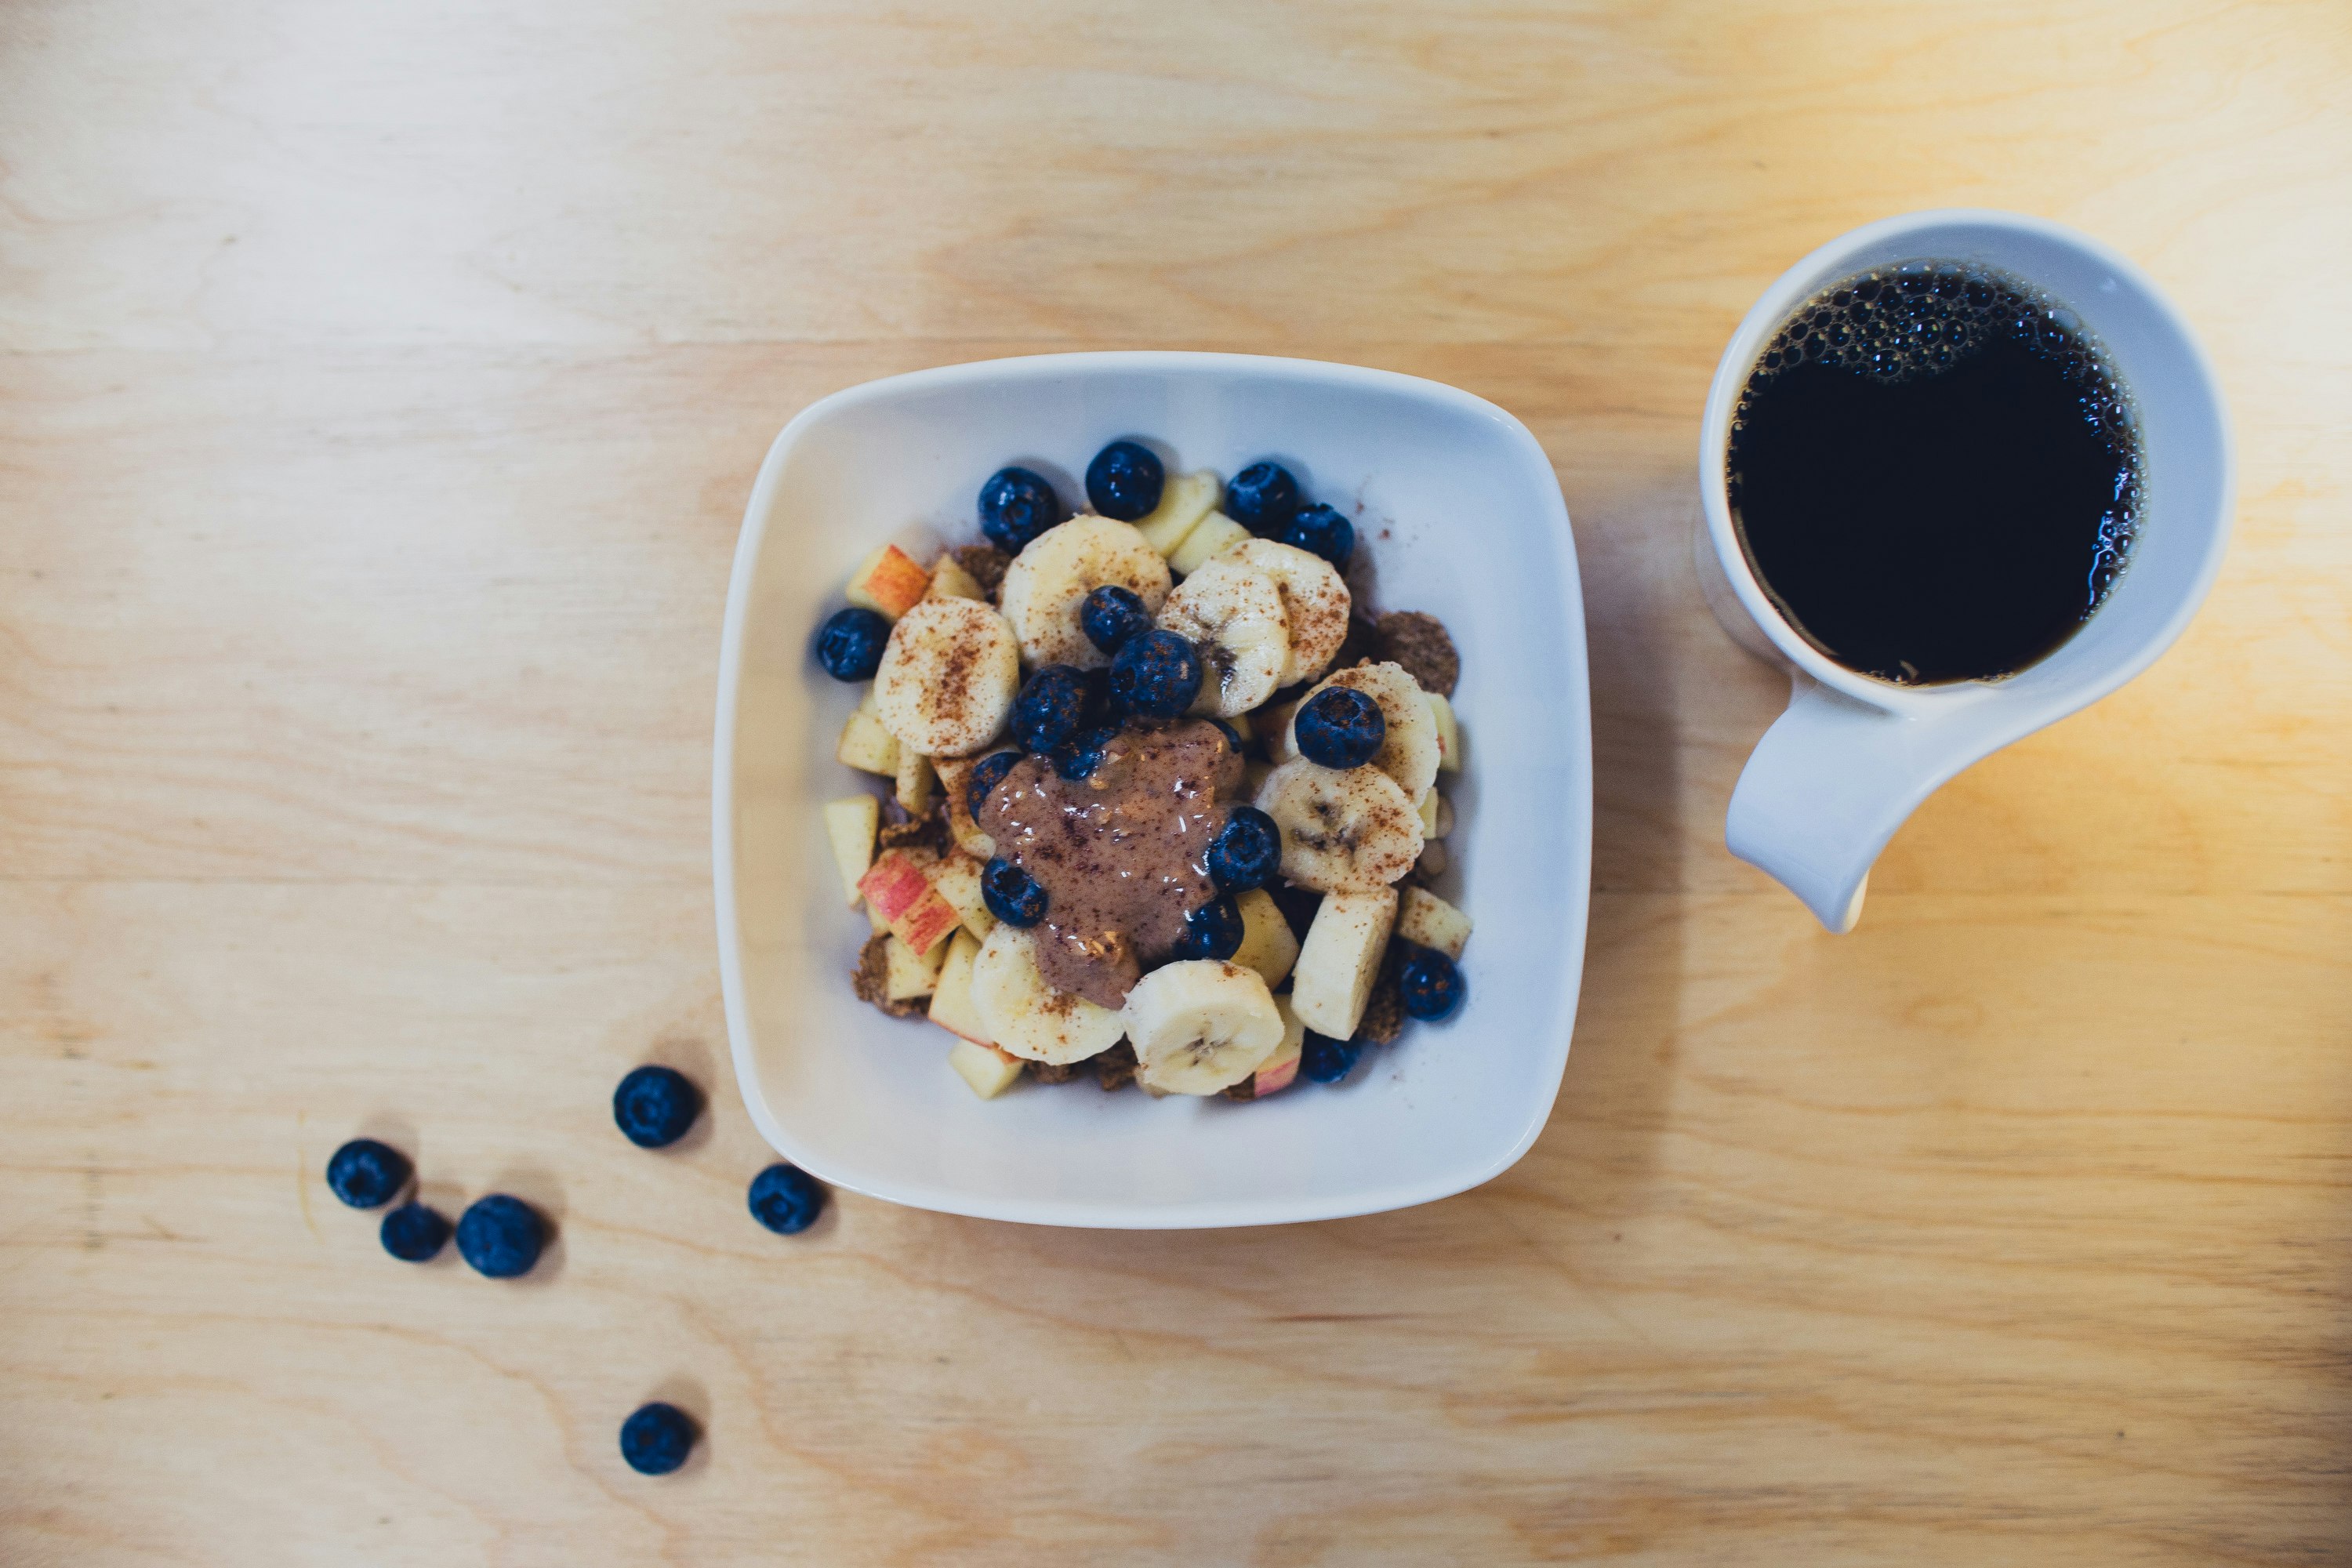 sliced bananas with berries and peanut butter beside cup of coffee on table